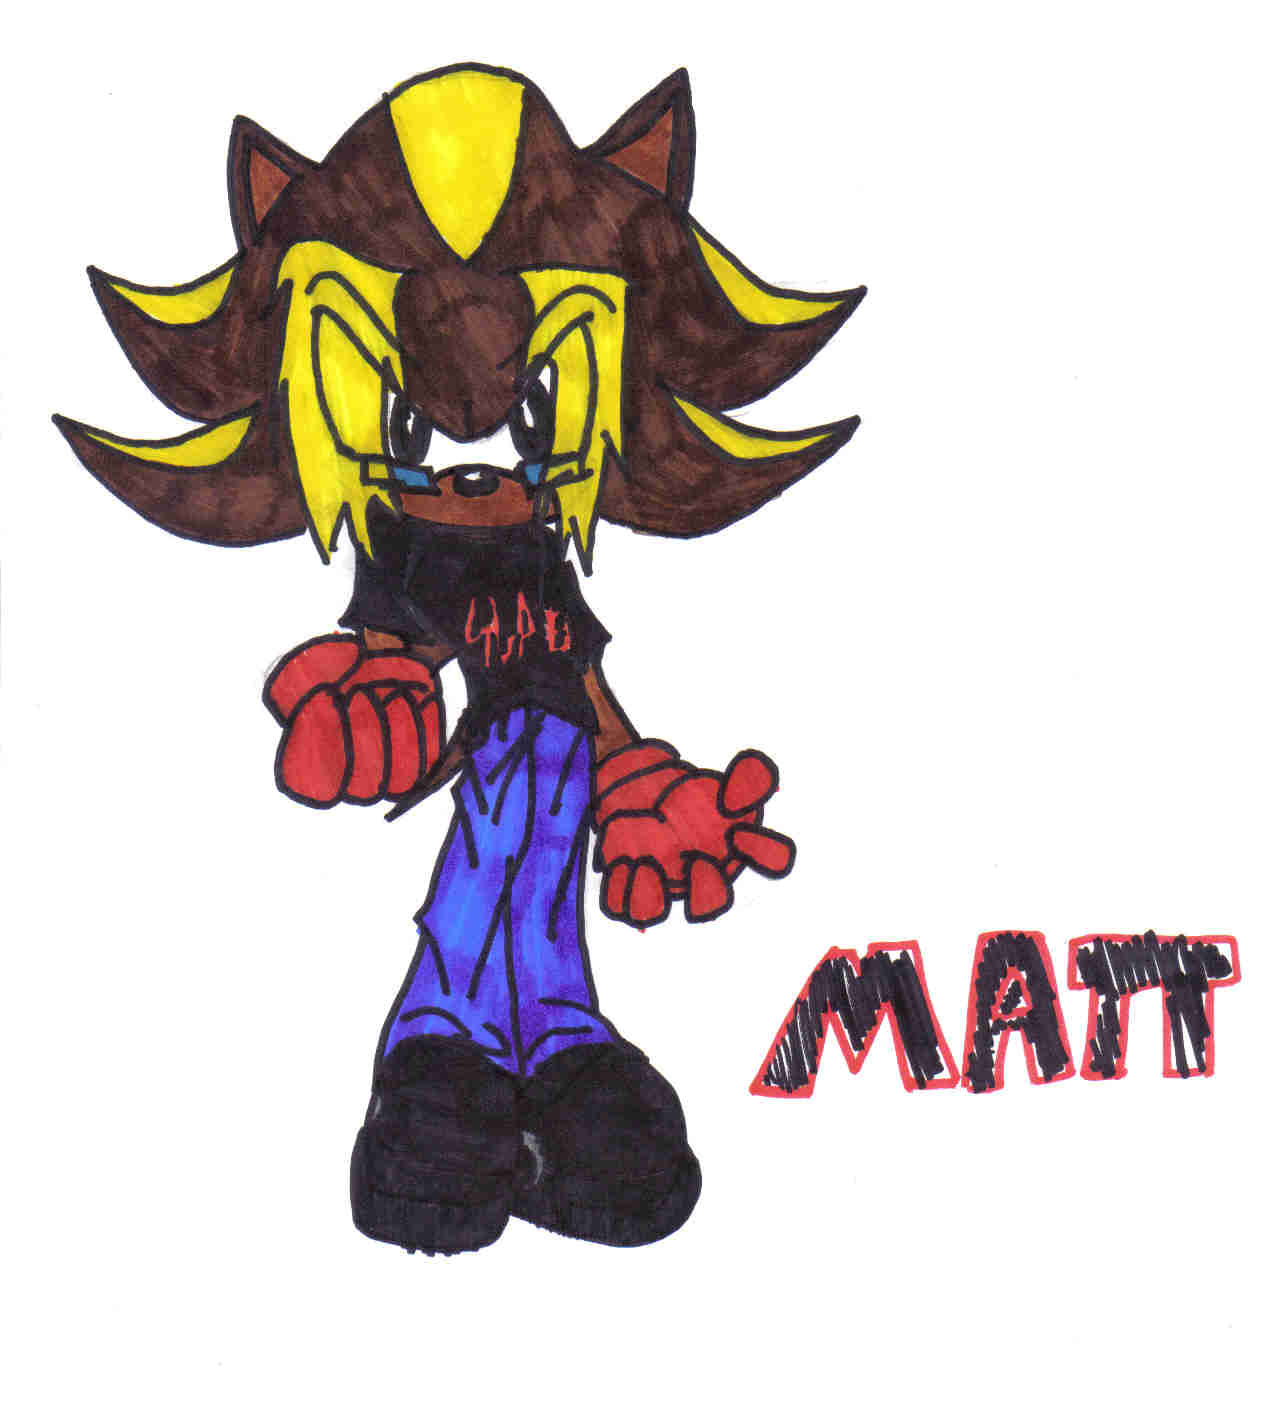 Matthew the Hedgehog-for Reign_in_blood by orchid